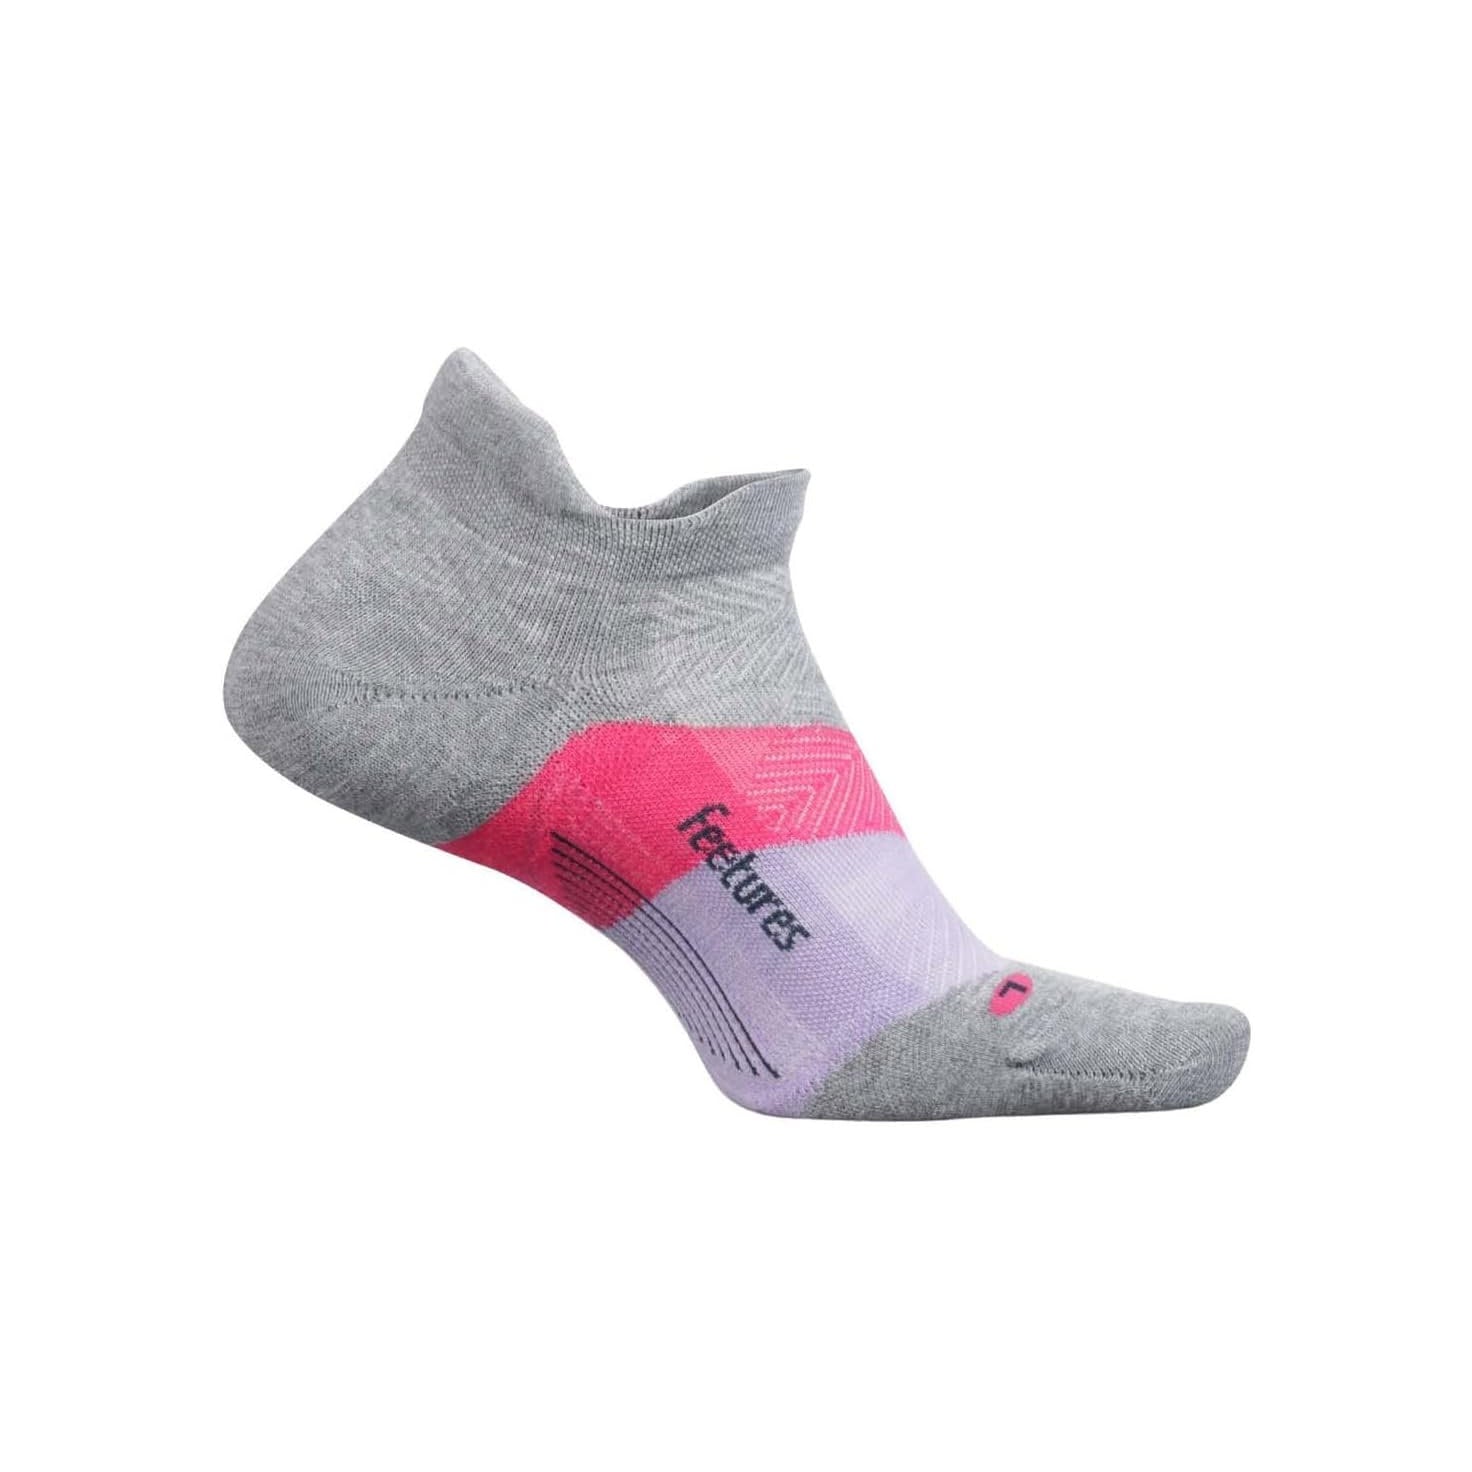 Low-cut athletic sock in gray with a pink gradient design and the word "feature" on the side, featuring Targeted Compression, isolated on a white background.